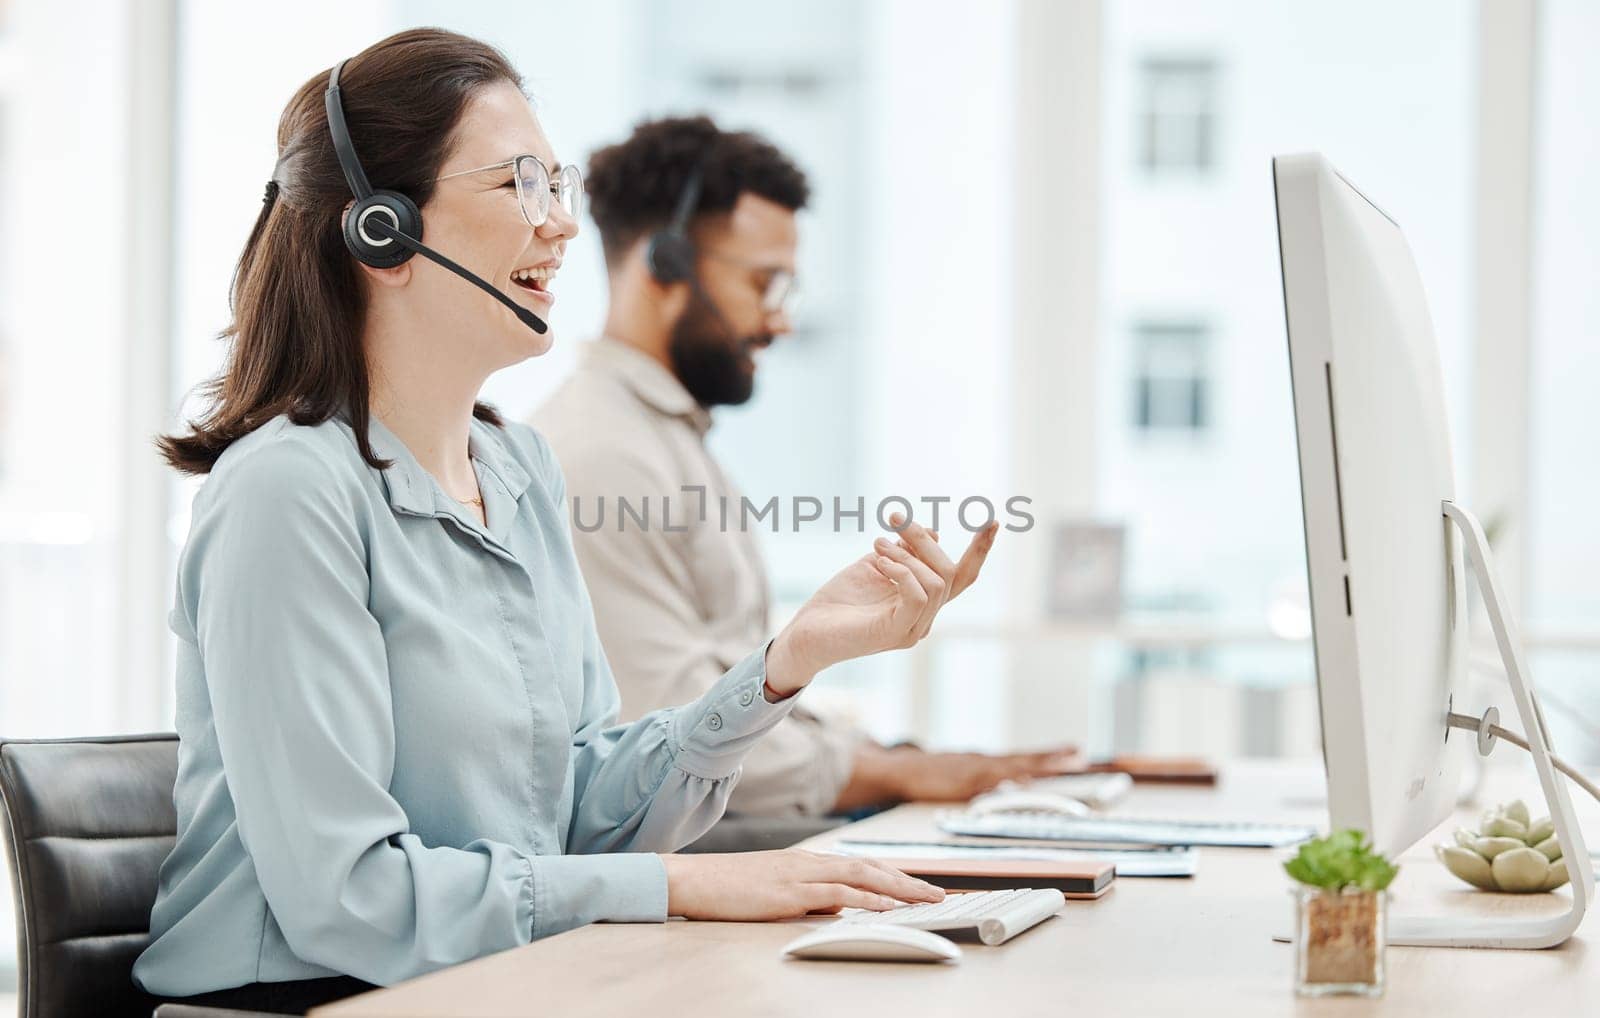 Call center, contact us and woman, phone call in business for customer service or telemarketing. Desk with computer, consulting with customer, consultant or agent, communication and support